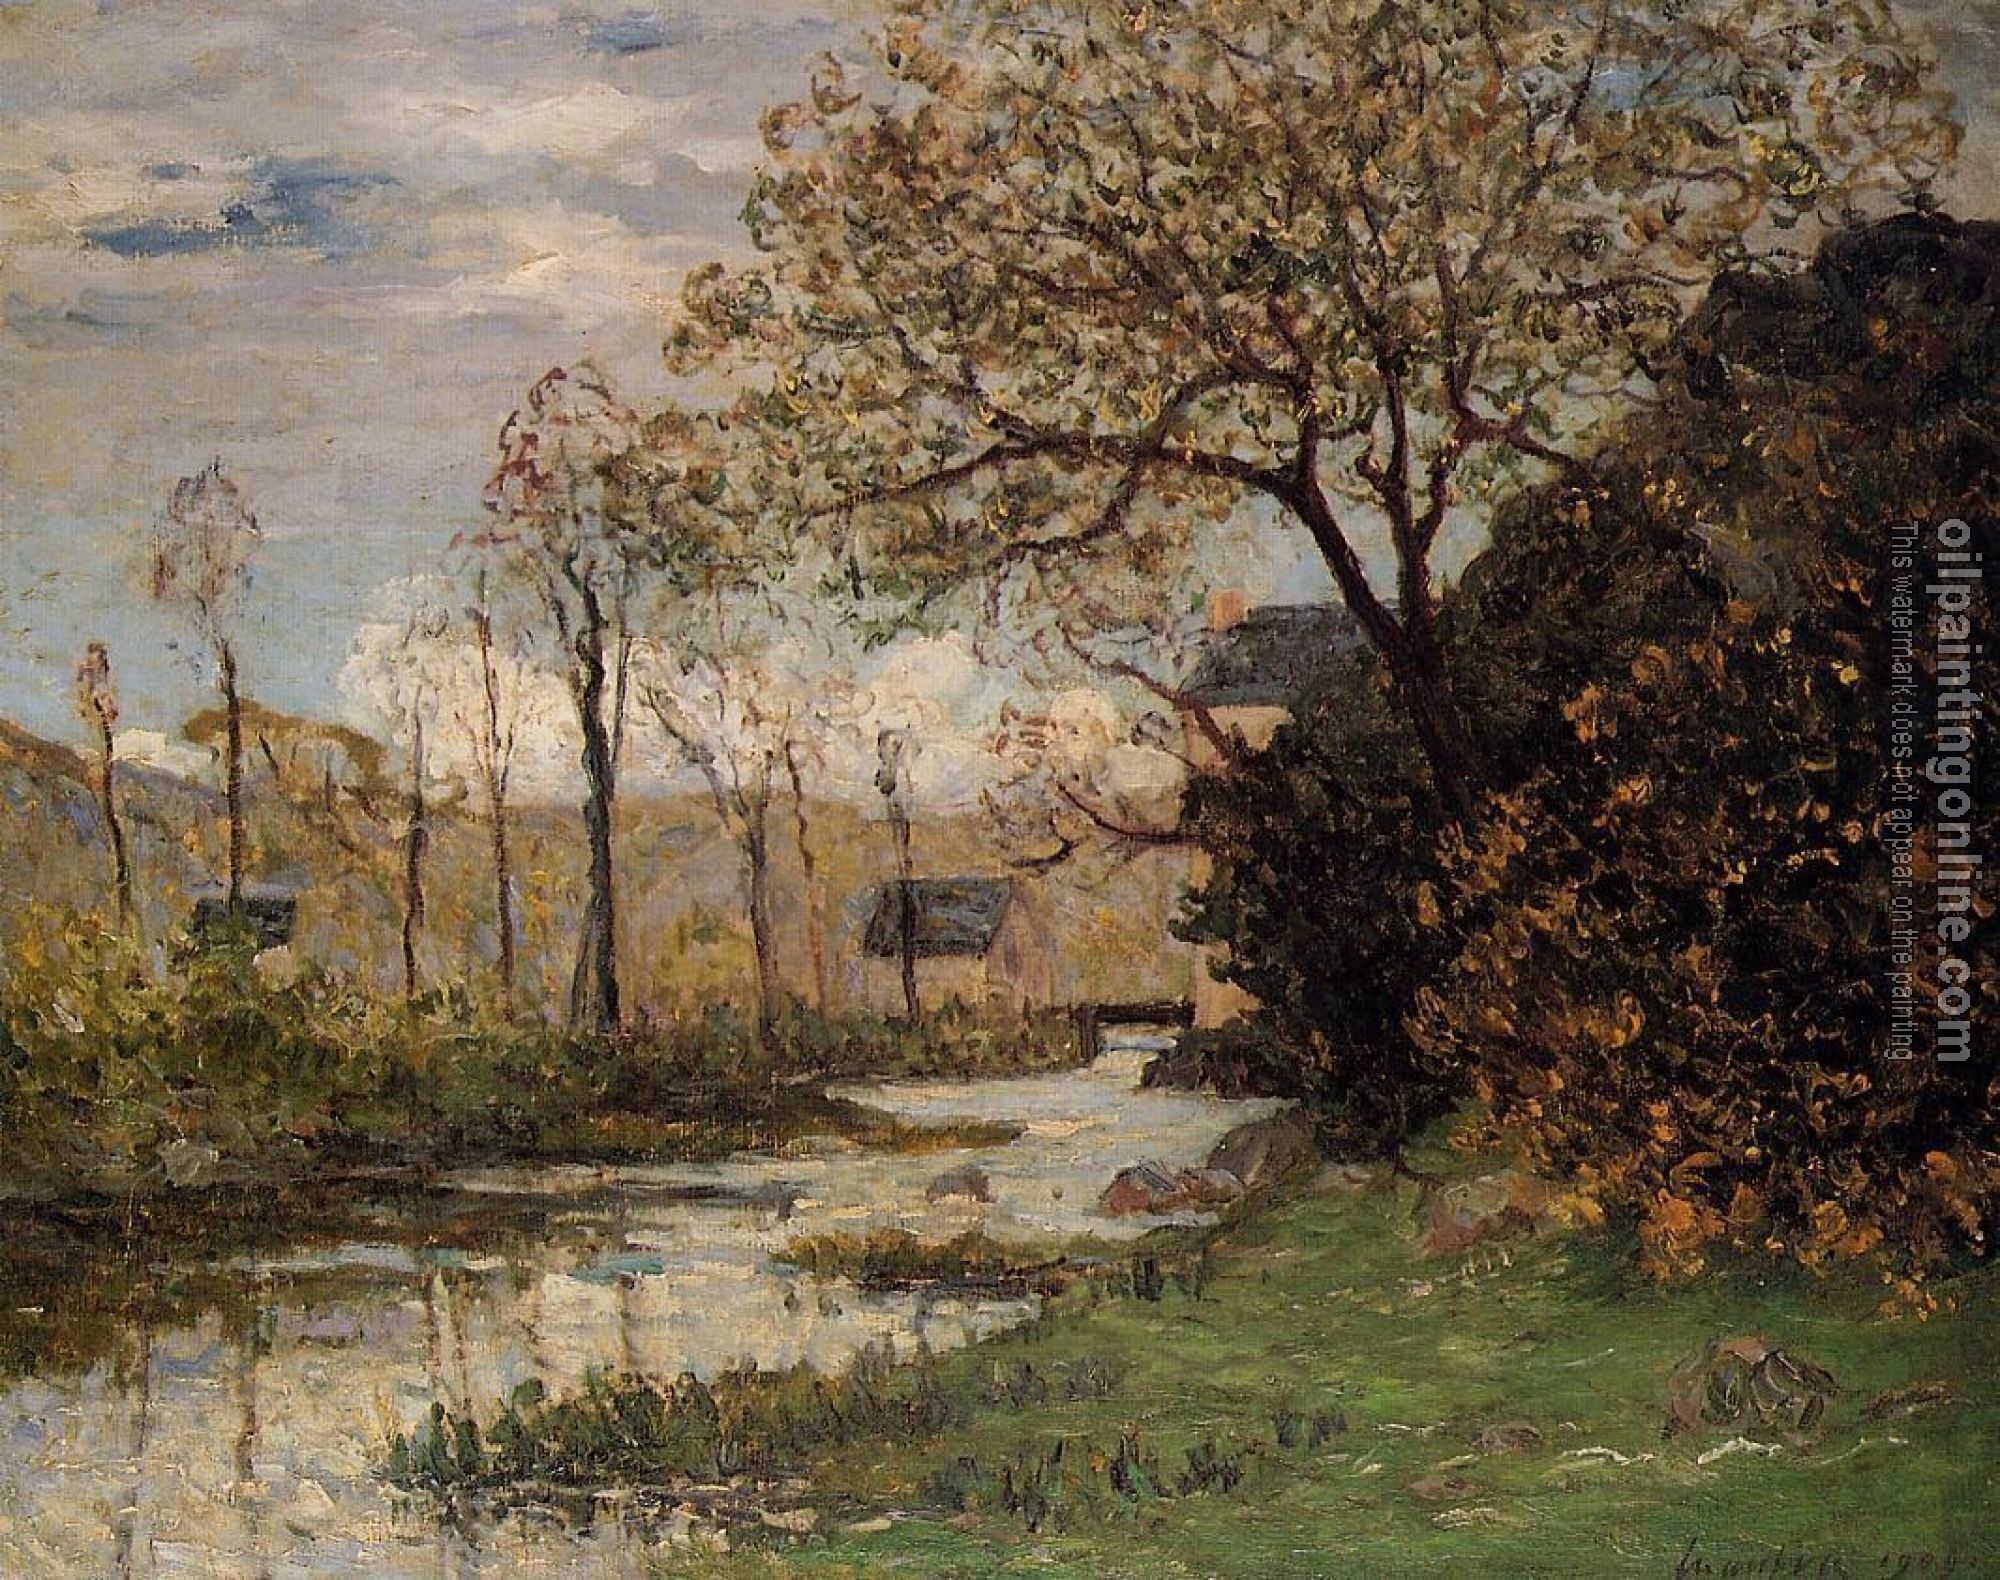 Maufra, Maxime - The Auray River, Spring